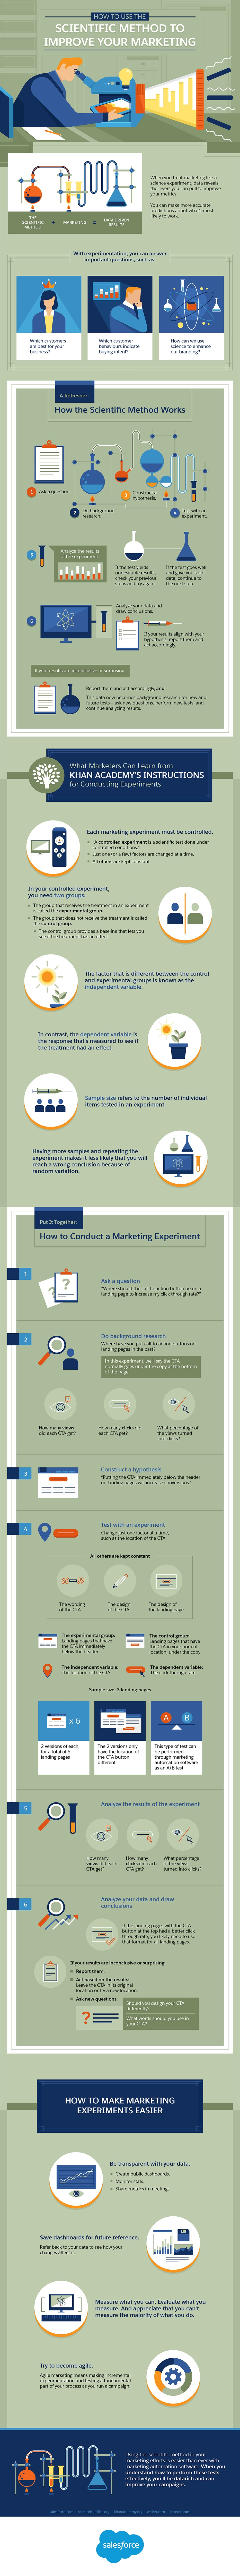 How to Use the Scientific Method to Improve Your Marketing